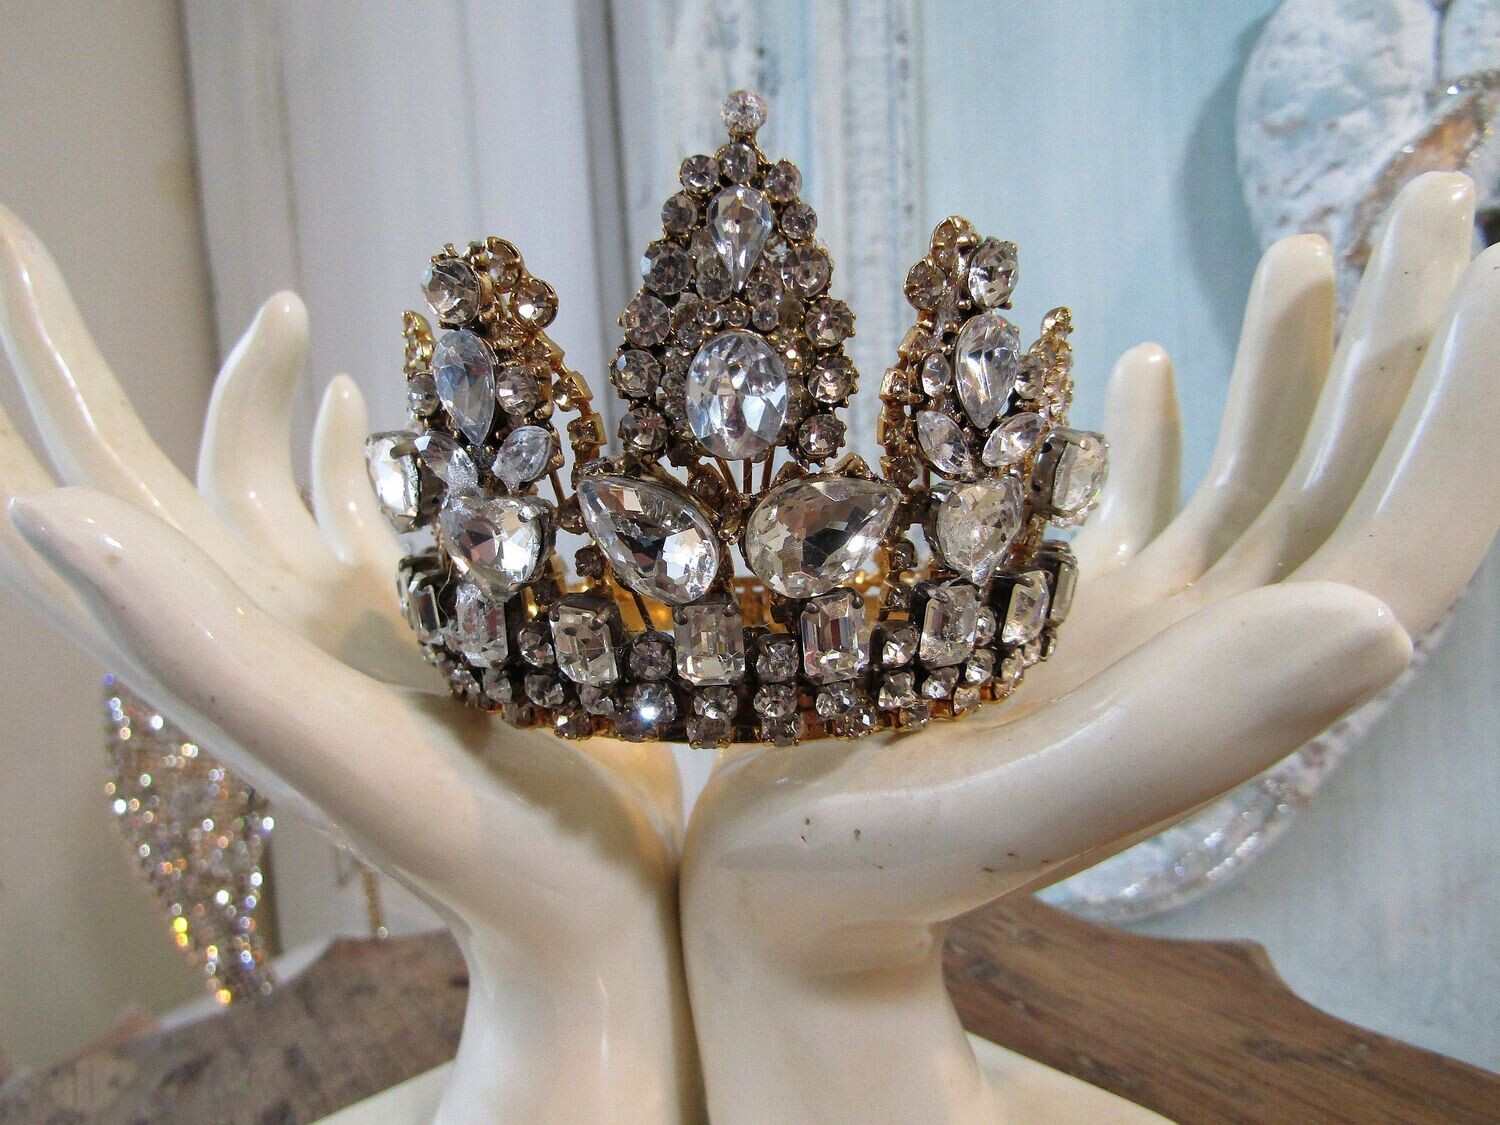 Handmade Santos jeweled crown, rhinestone embellished for statues and decor